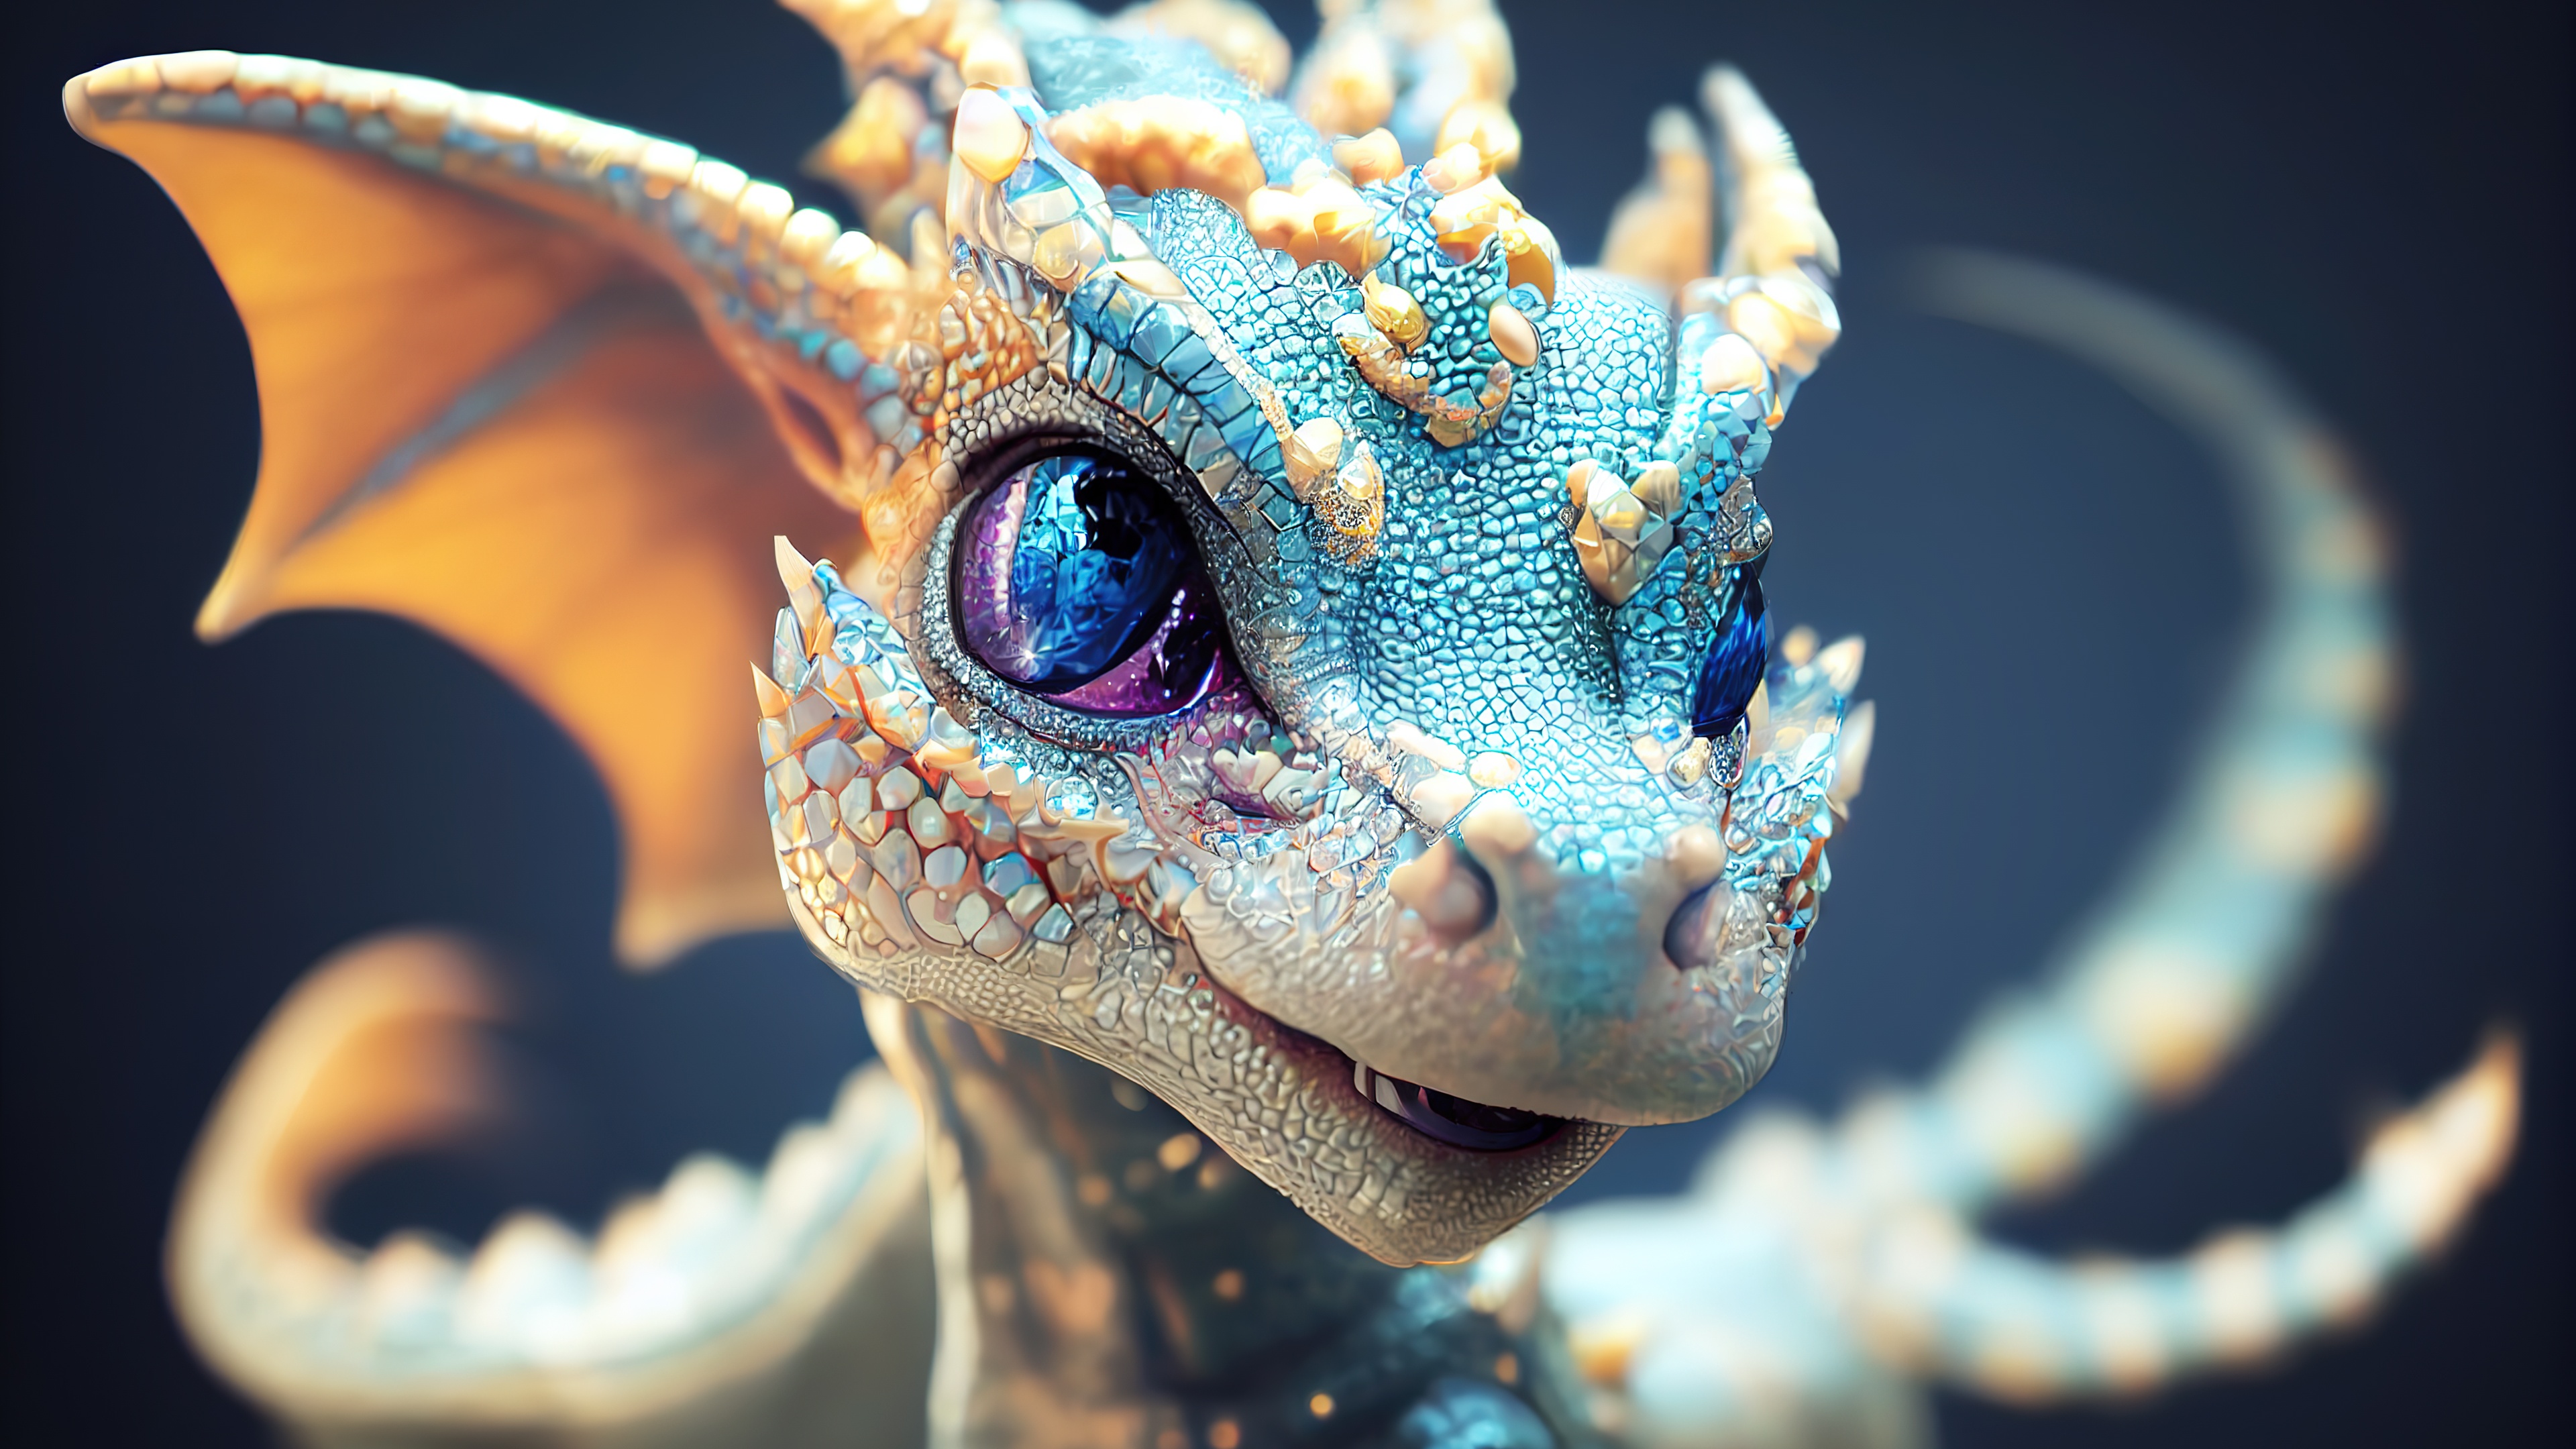 Discover 73+ cool dragon wallpapers super hot - in.cdgdbentre